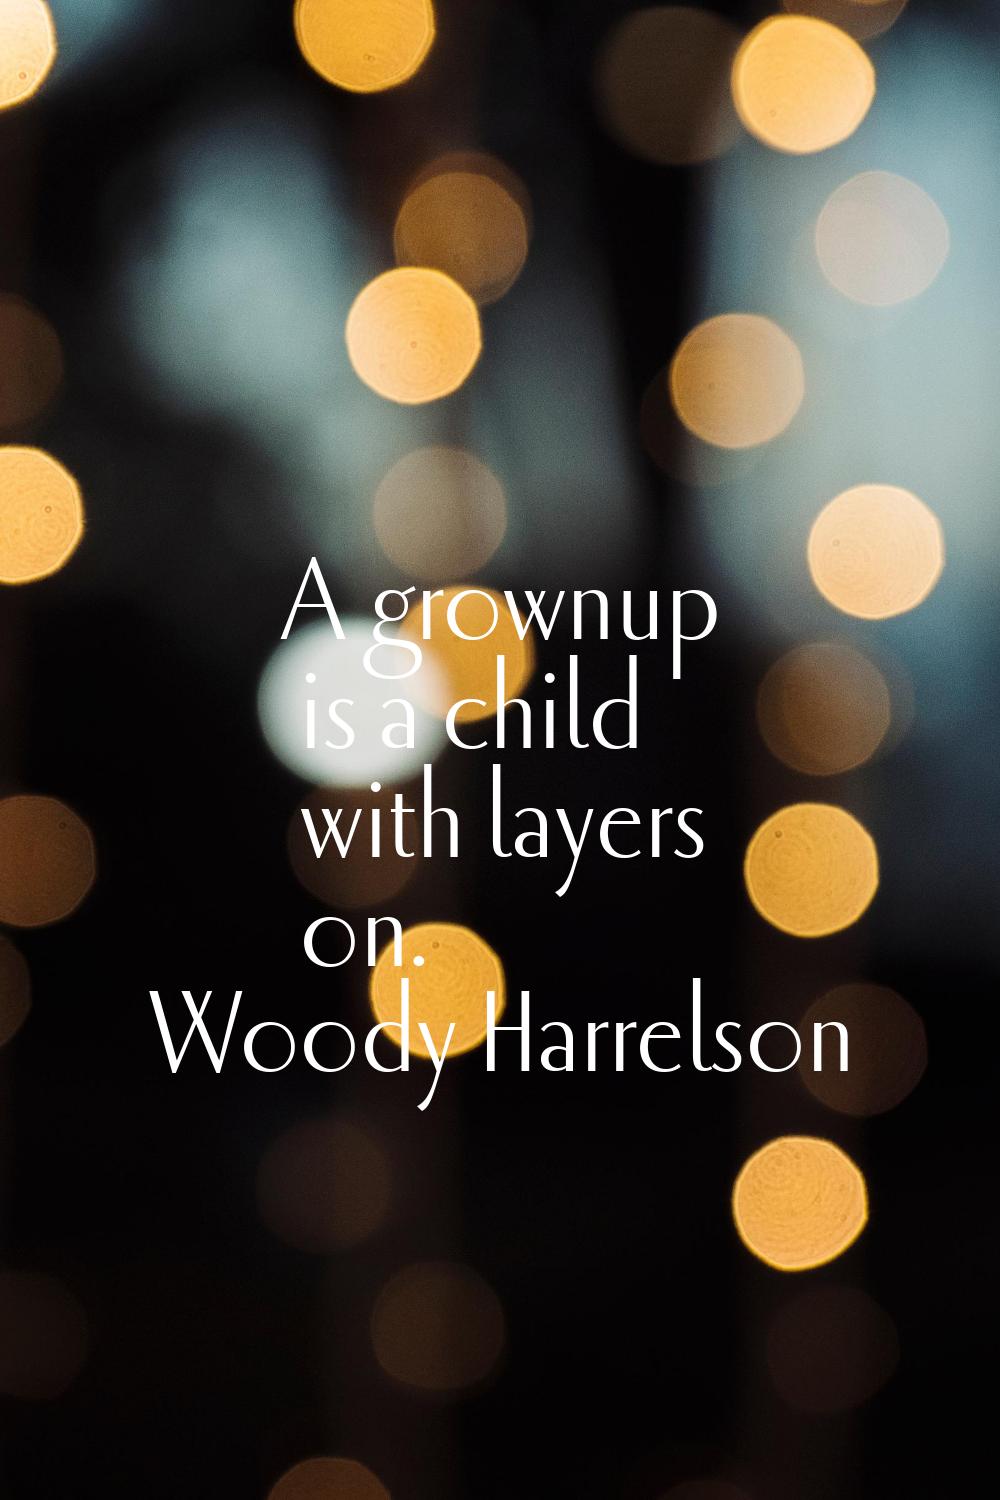 A grownup is a child with layers on.